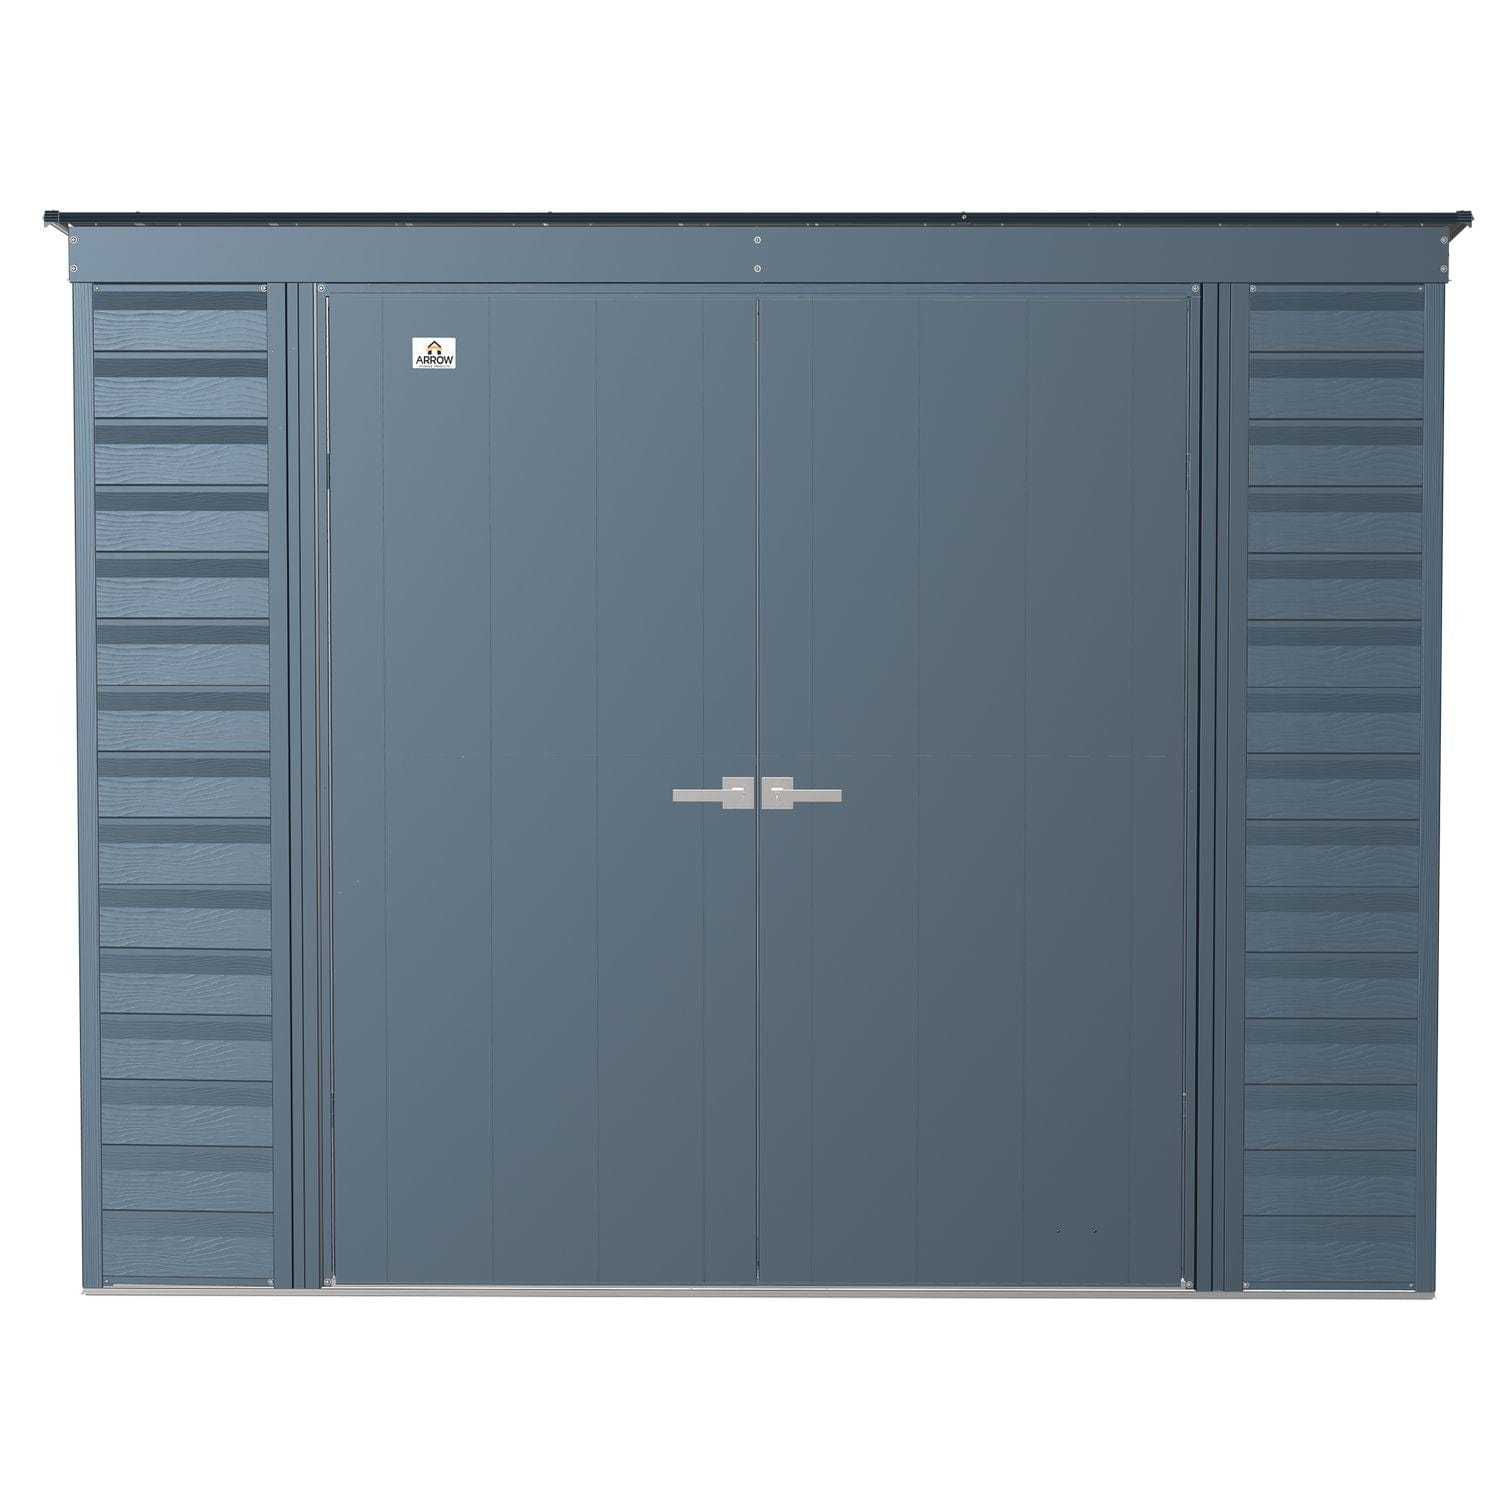 Arrow Sheds & Storage Buildings Arrow | Select Pent Roof Steel Storage Shed, 8x4 ft., Blue Grey SCP84BG